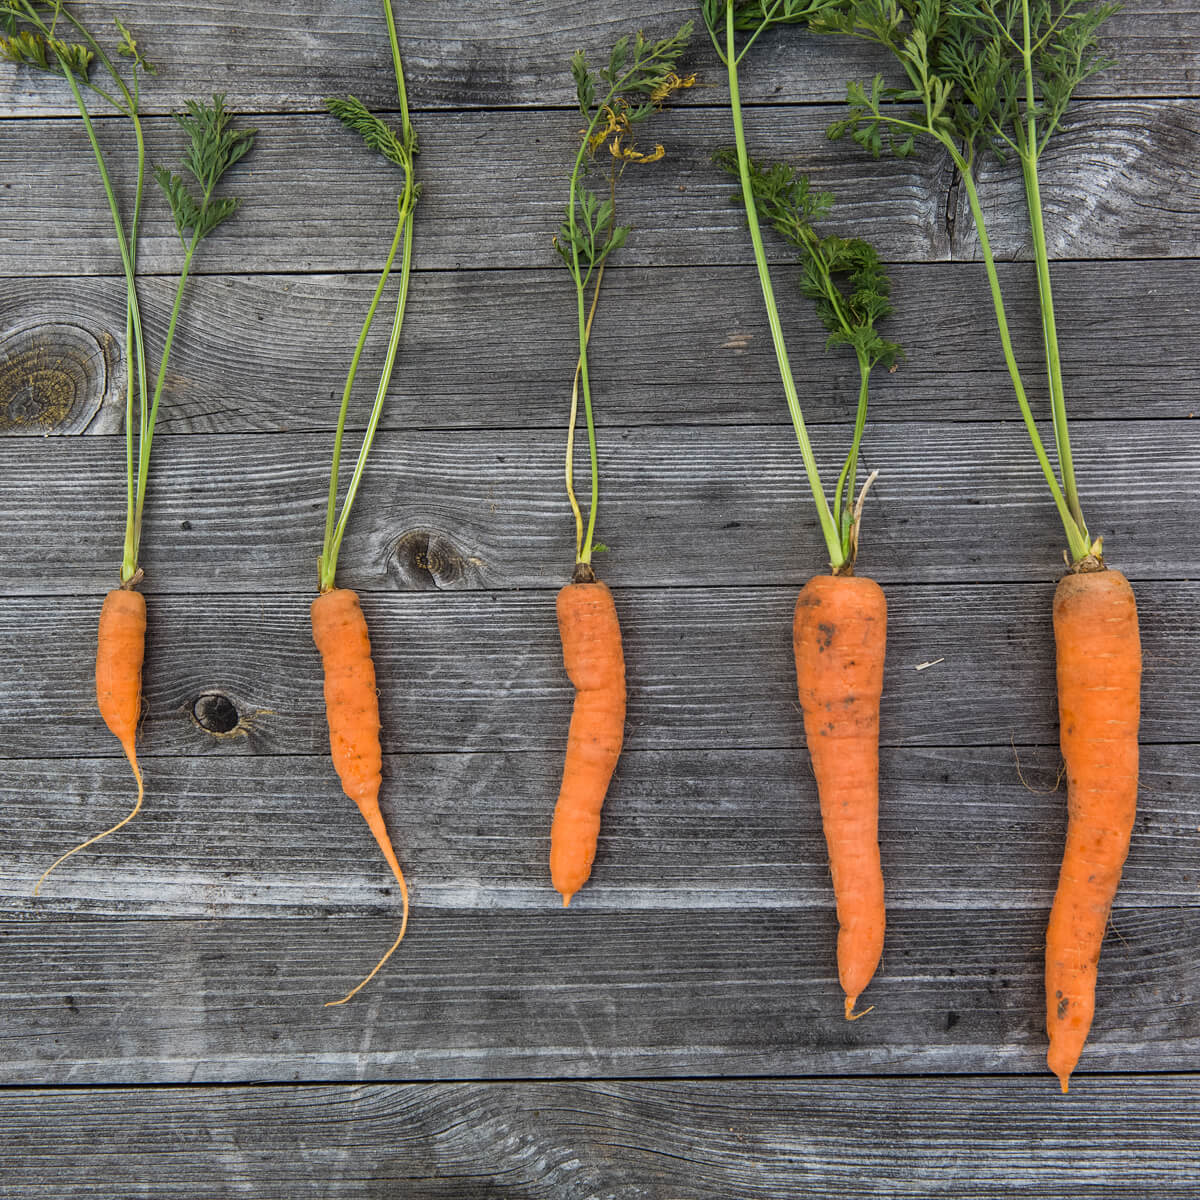 Different Carrot Sizes Lined up on a Wooden Background - When to Pick Carrots - Photo by Markus Spiske from Pexels